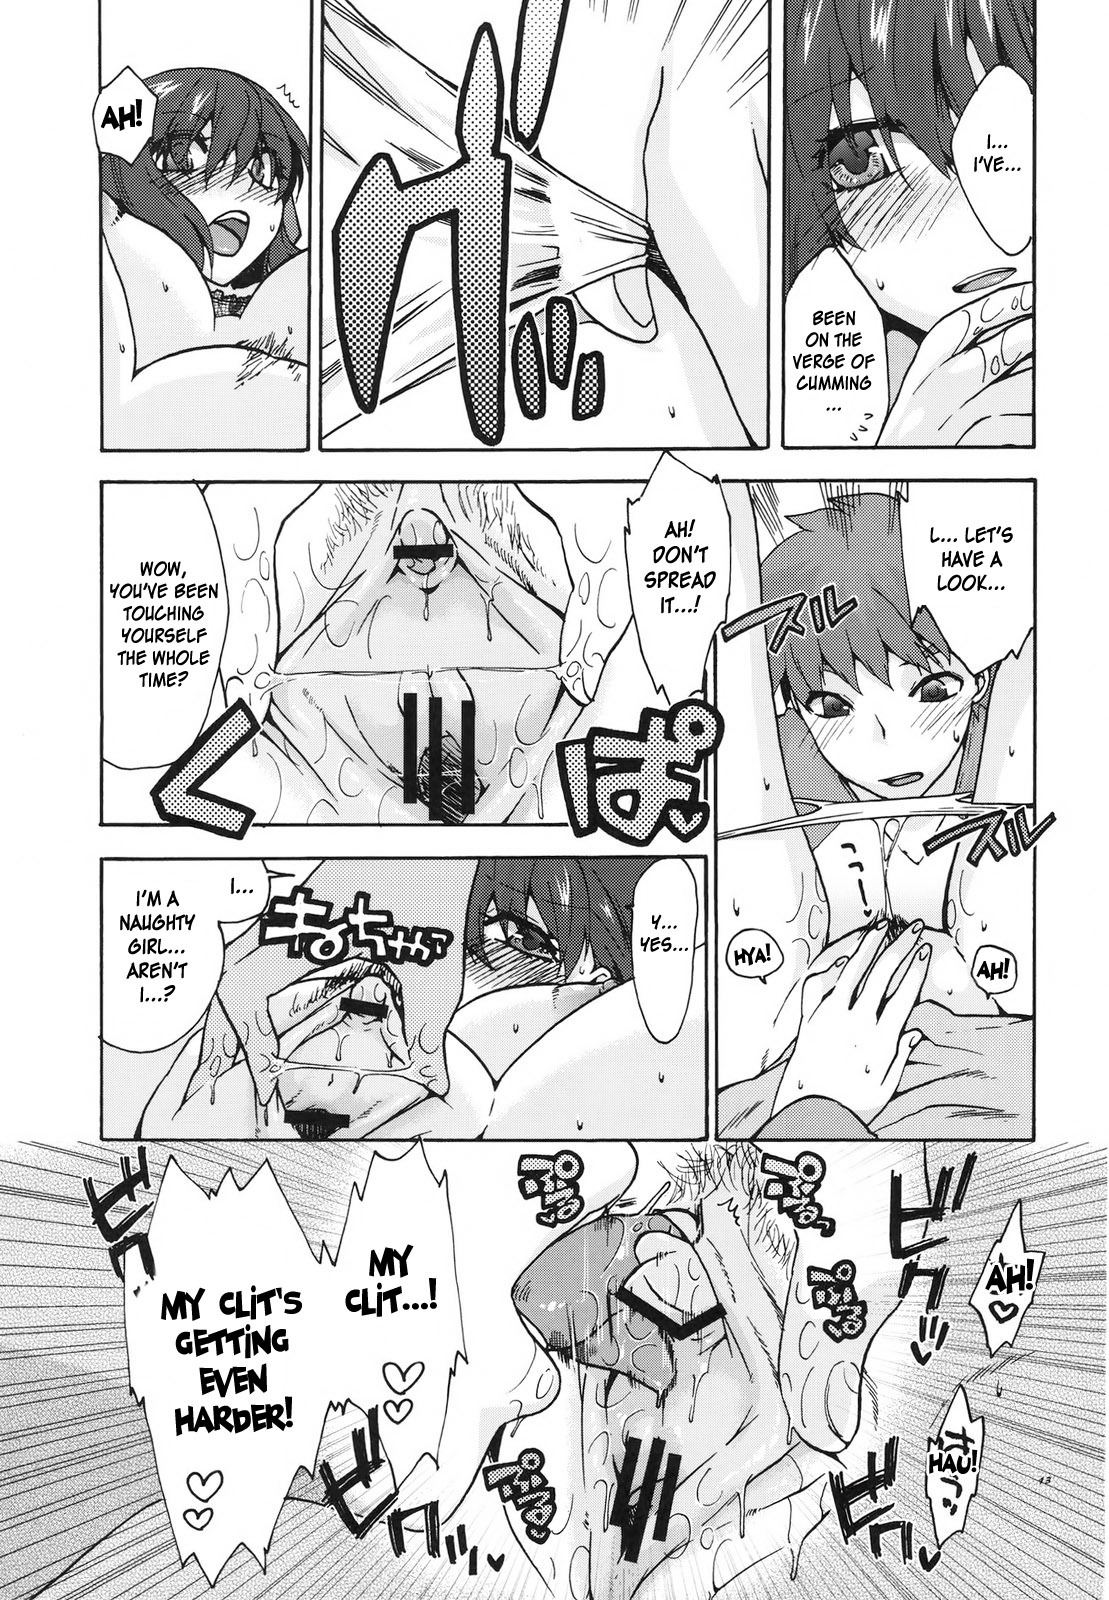 (C78) [TRIP SPIDER (niwacho)] Crime and Affection (Fate/Stay Night) [English] [desudesu] page 13 full